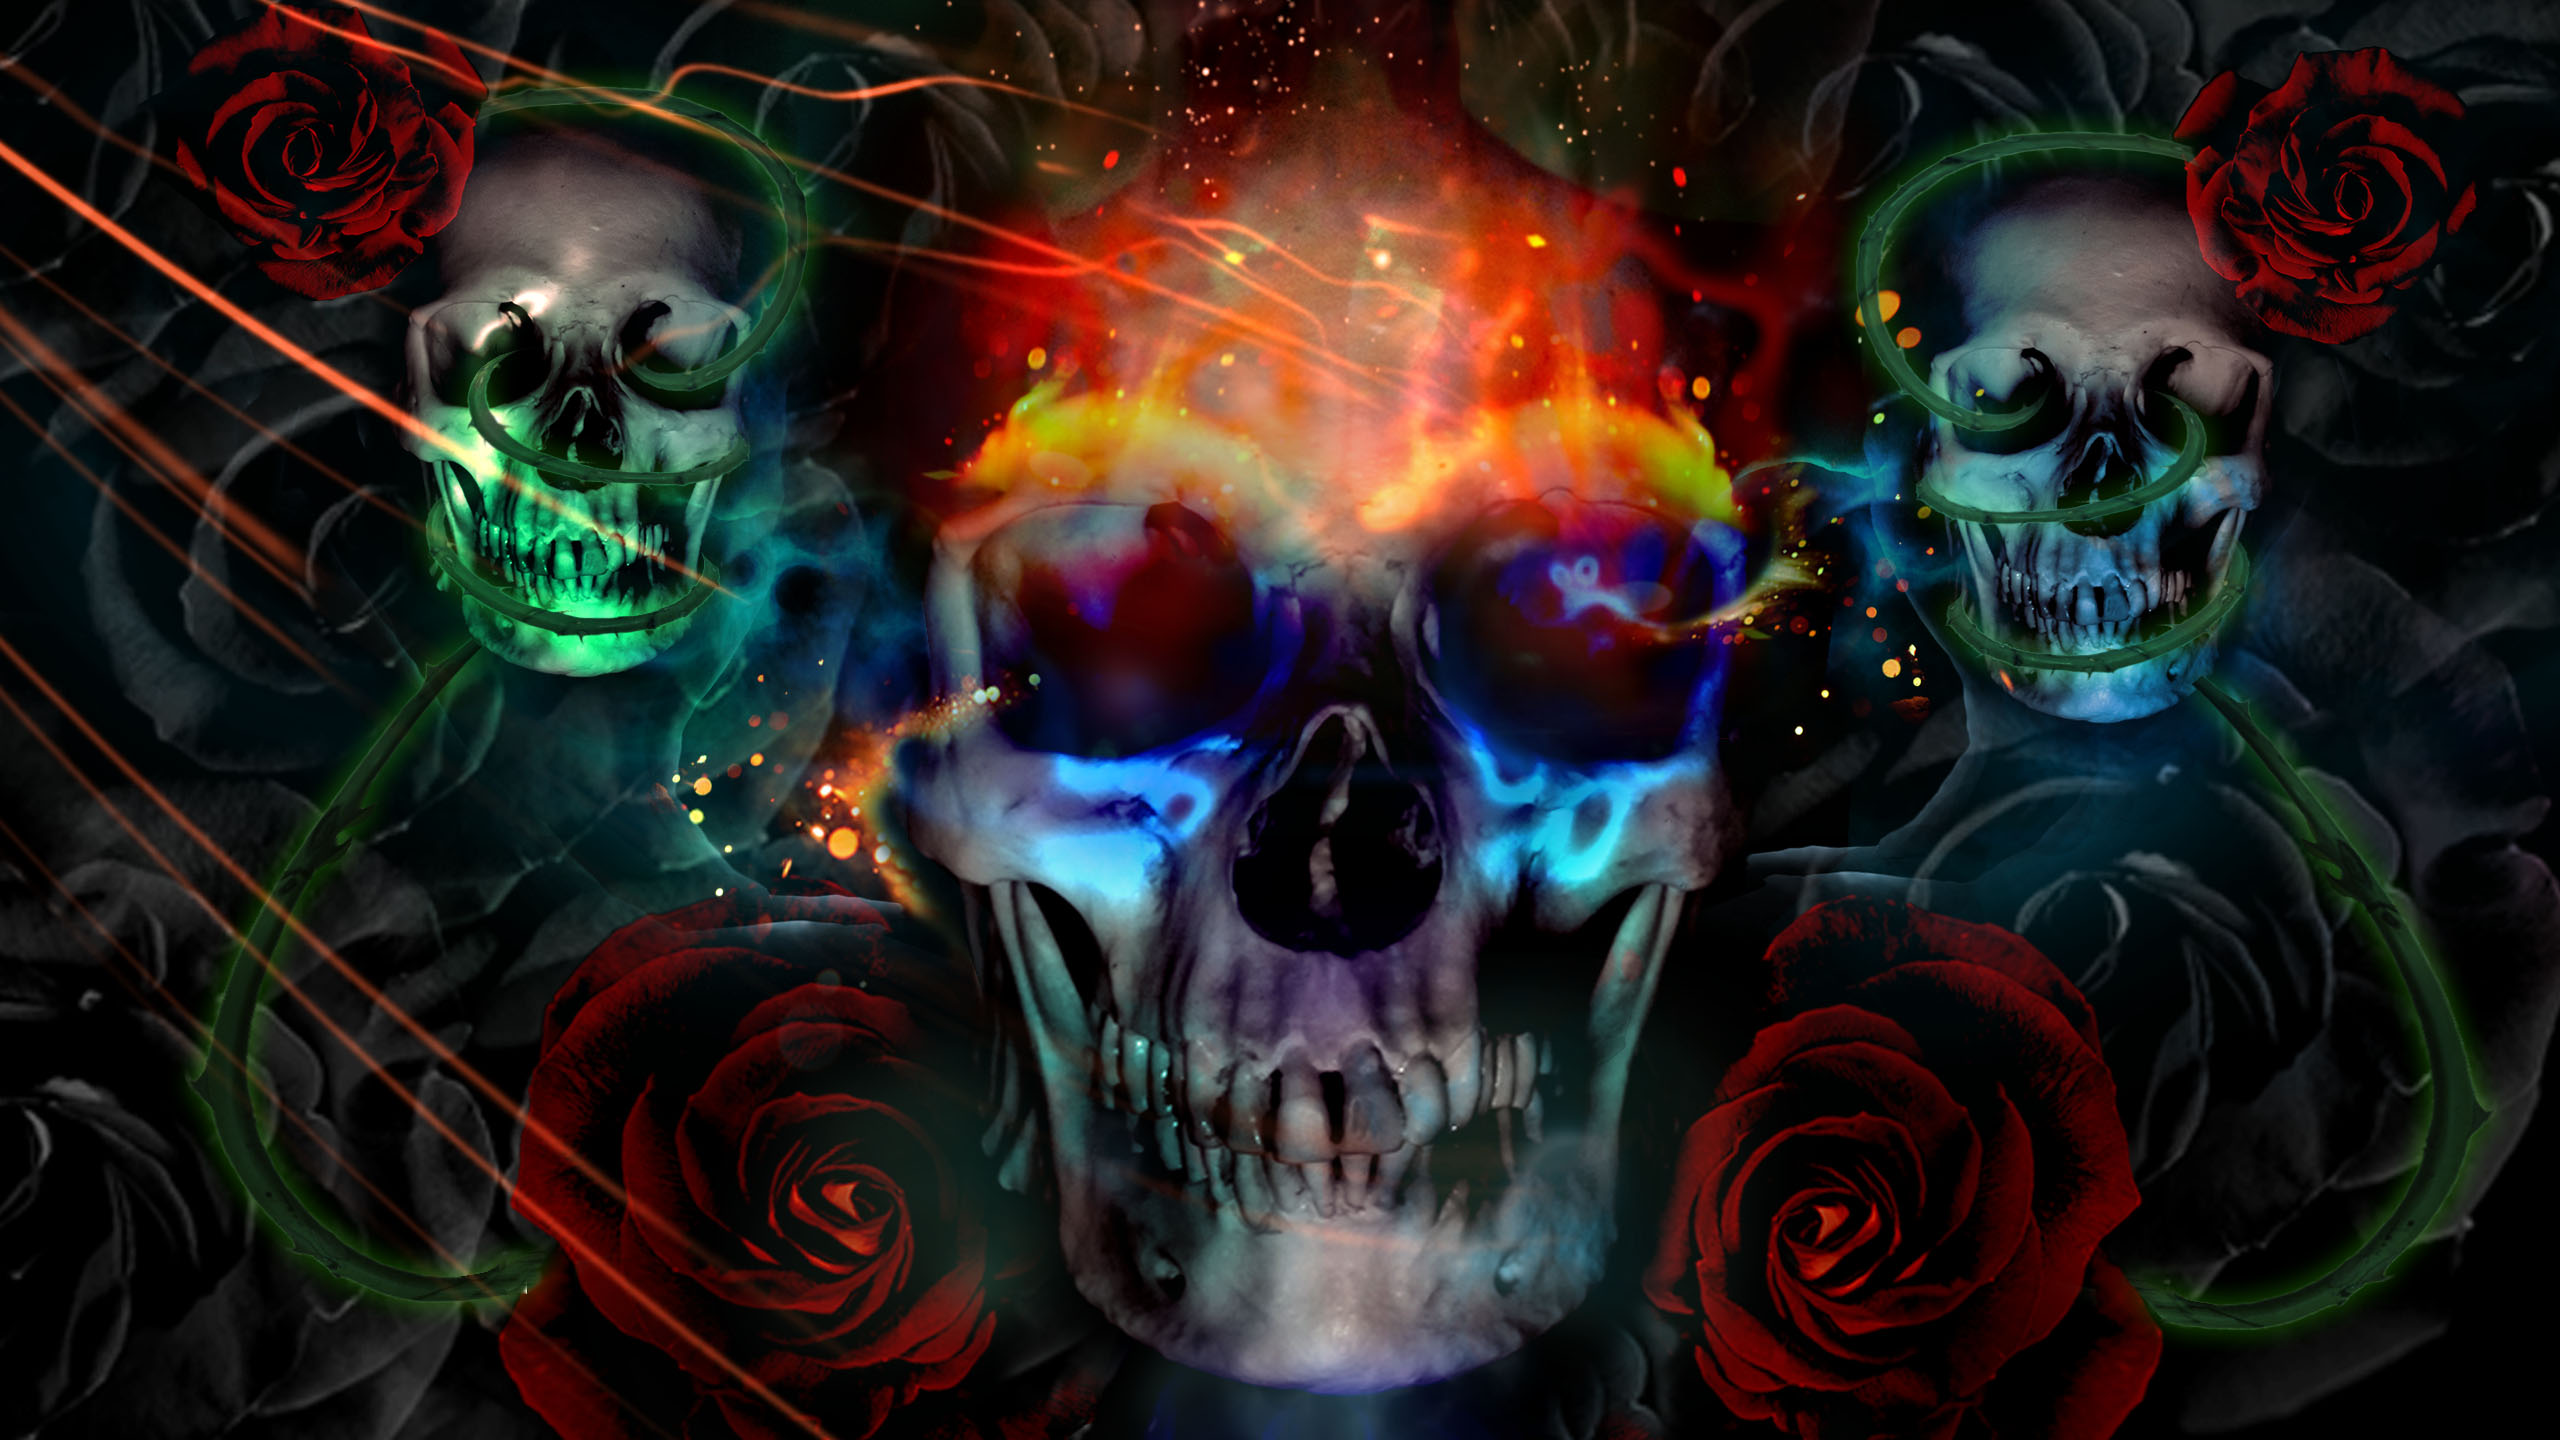 Amazing Free Desktop Wallpaper Skulls of all time Check it out now 